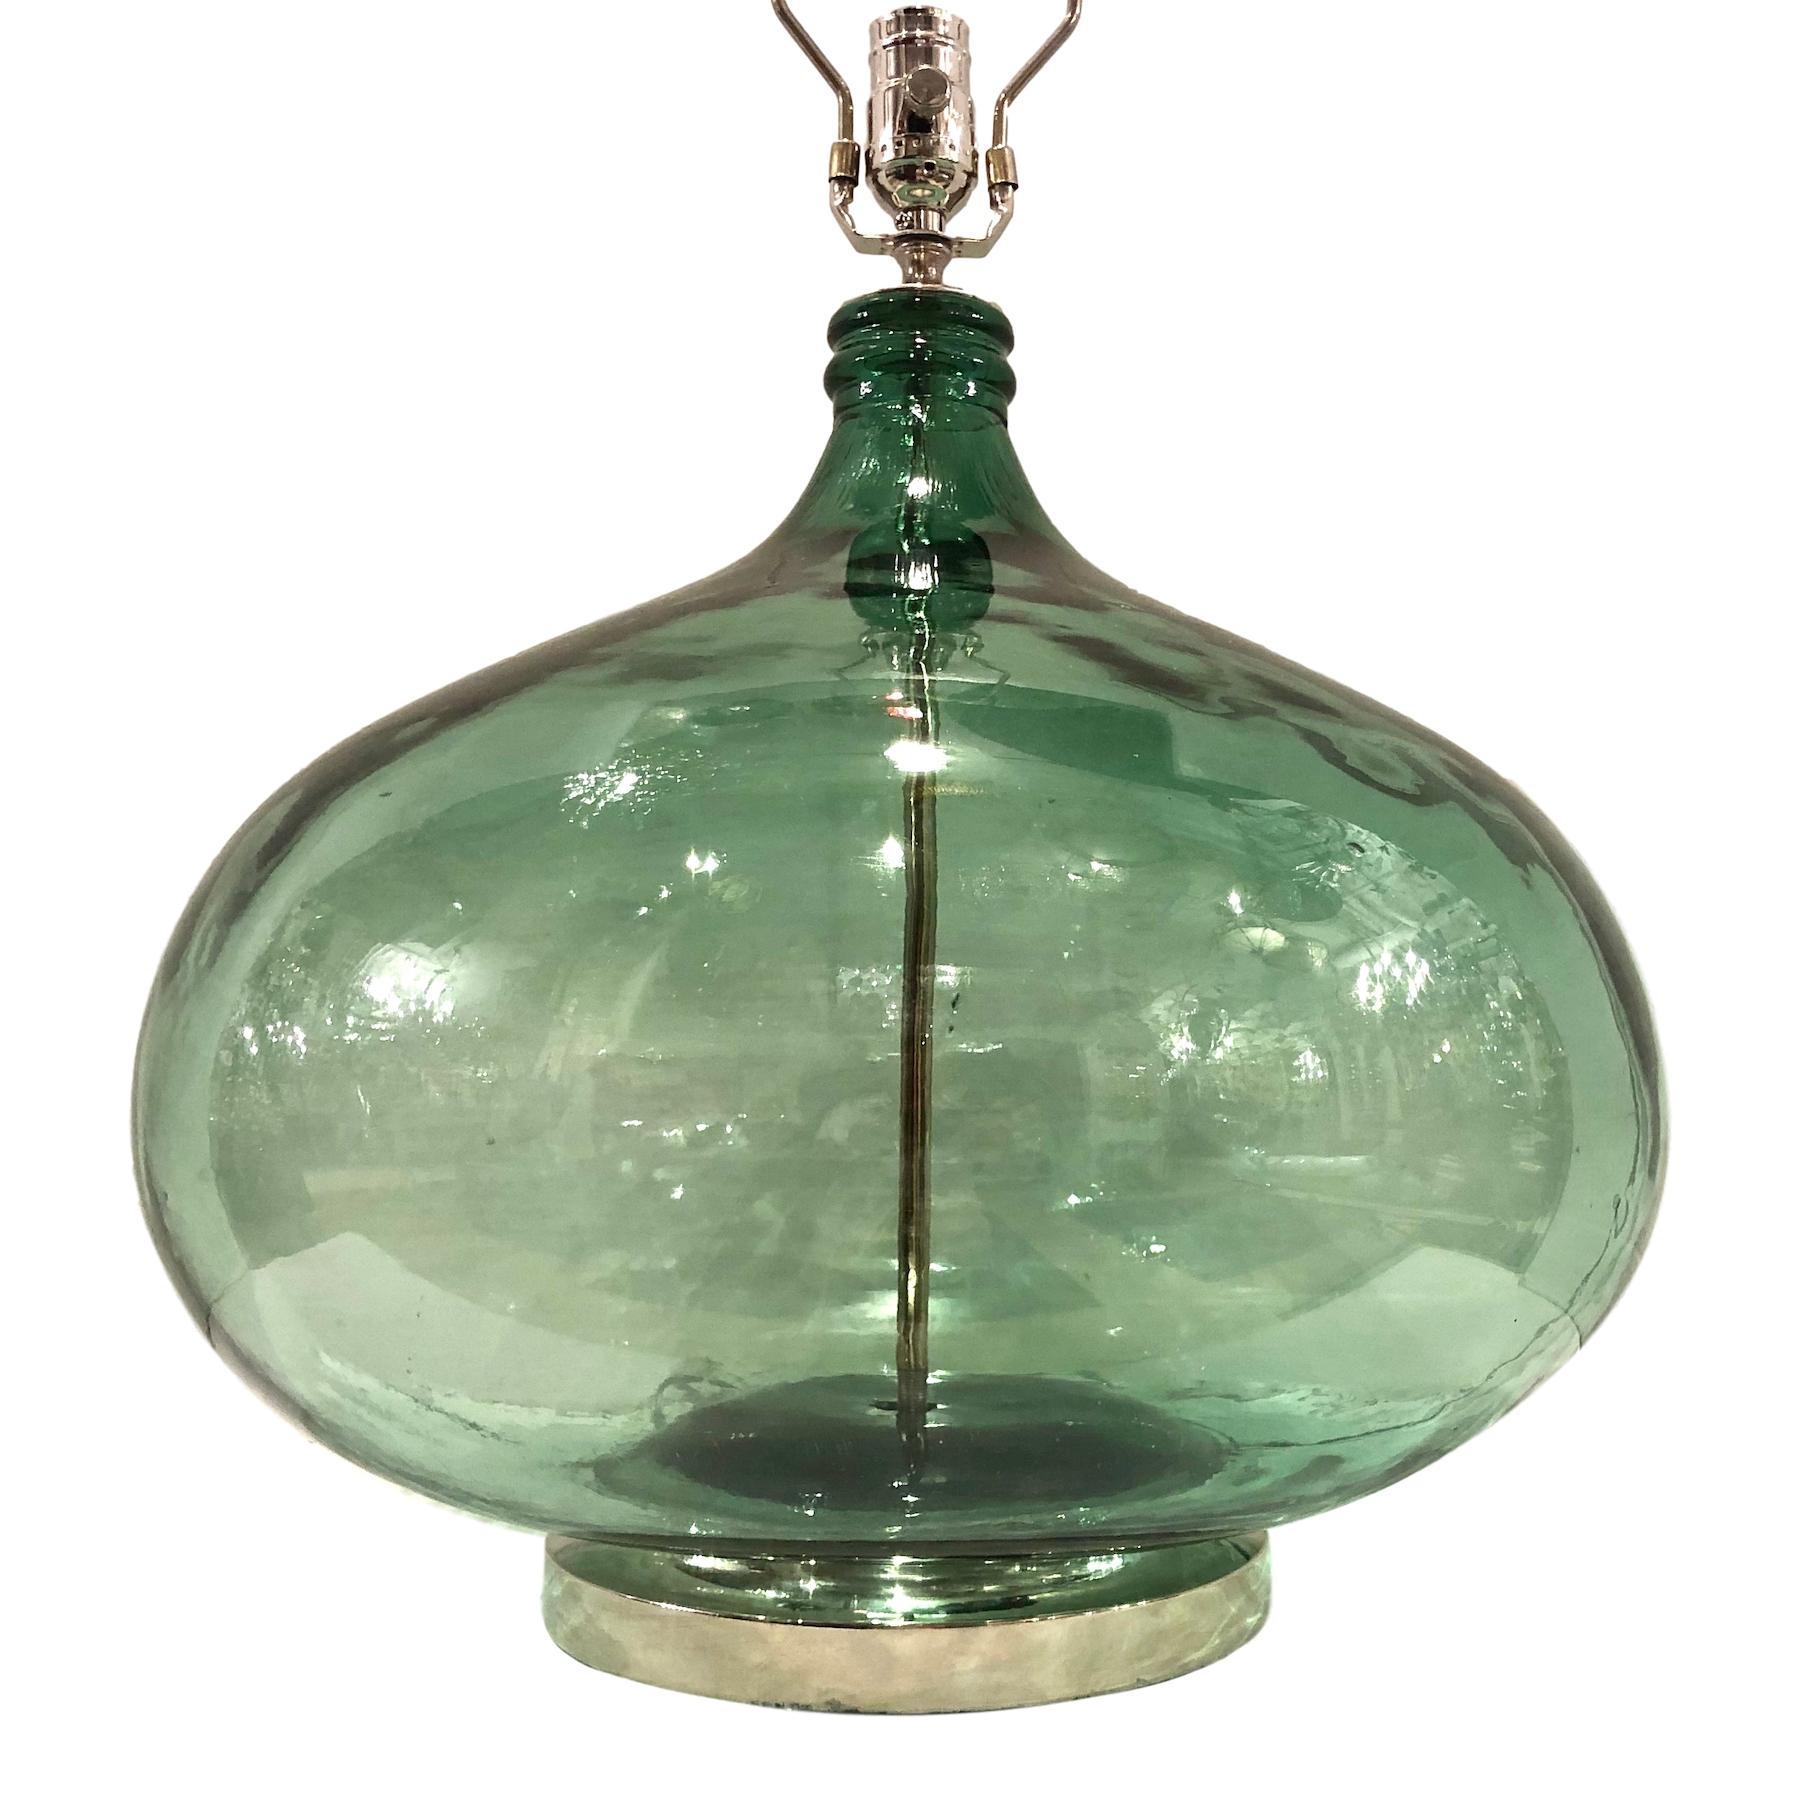 A single circa 1940's Italian extra large bottle converted to lamp.

Measurements:
Height of body: 16